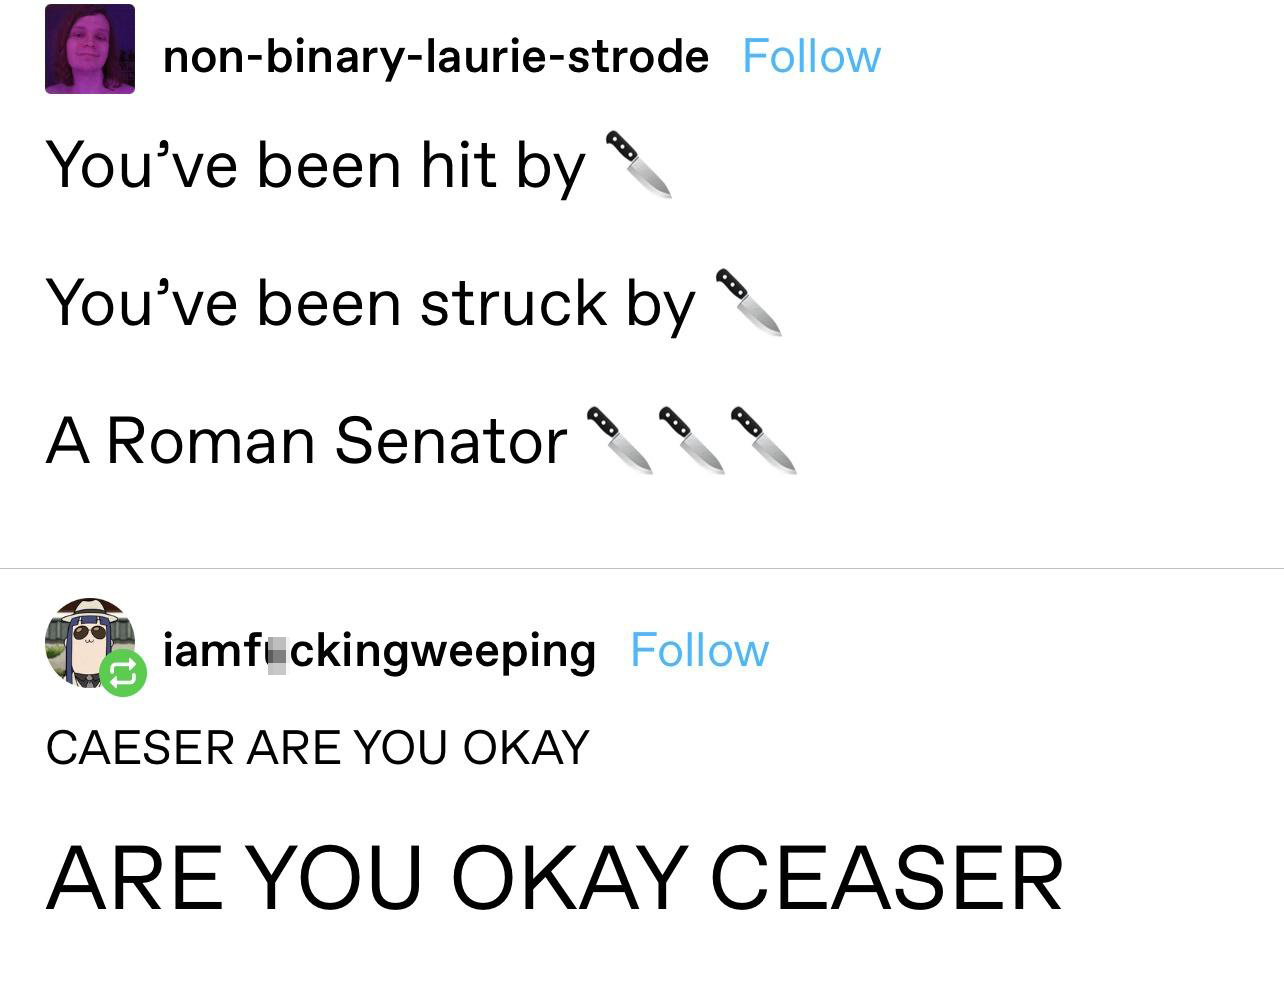 funny memes - caesar are you ok are you ok caesar - nonbinarylauriestrode You've been hit by You've been struck by A Roman Senator ... . Caeser Are You Okay ... iamfickingweeping Are You Okay Ceaser